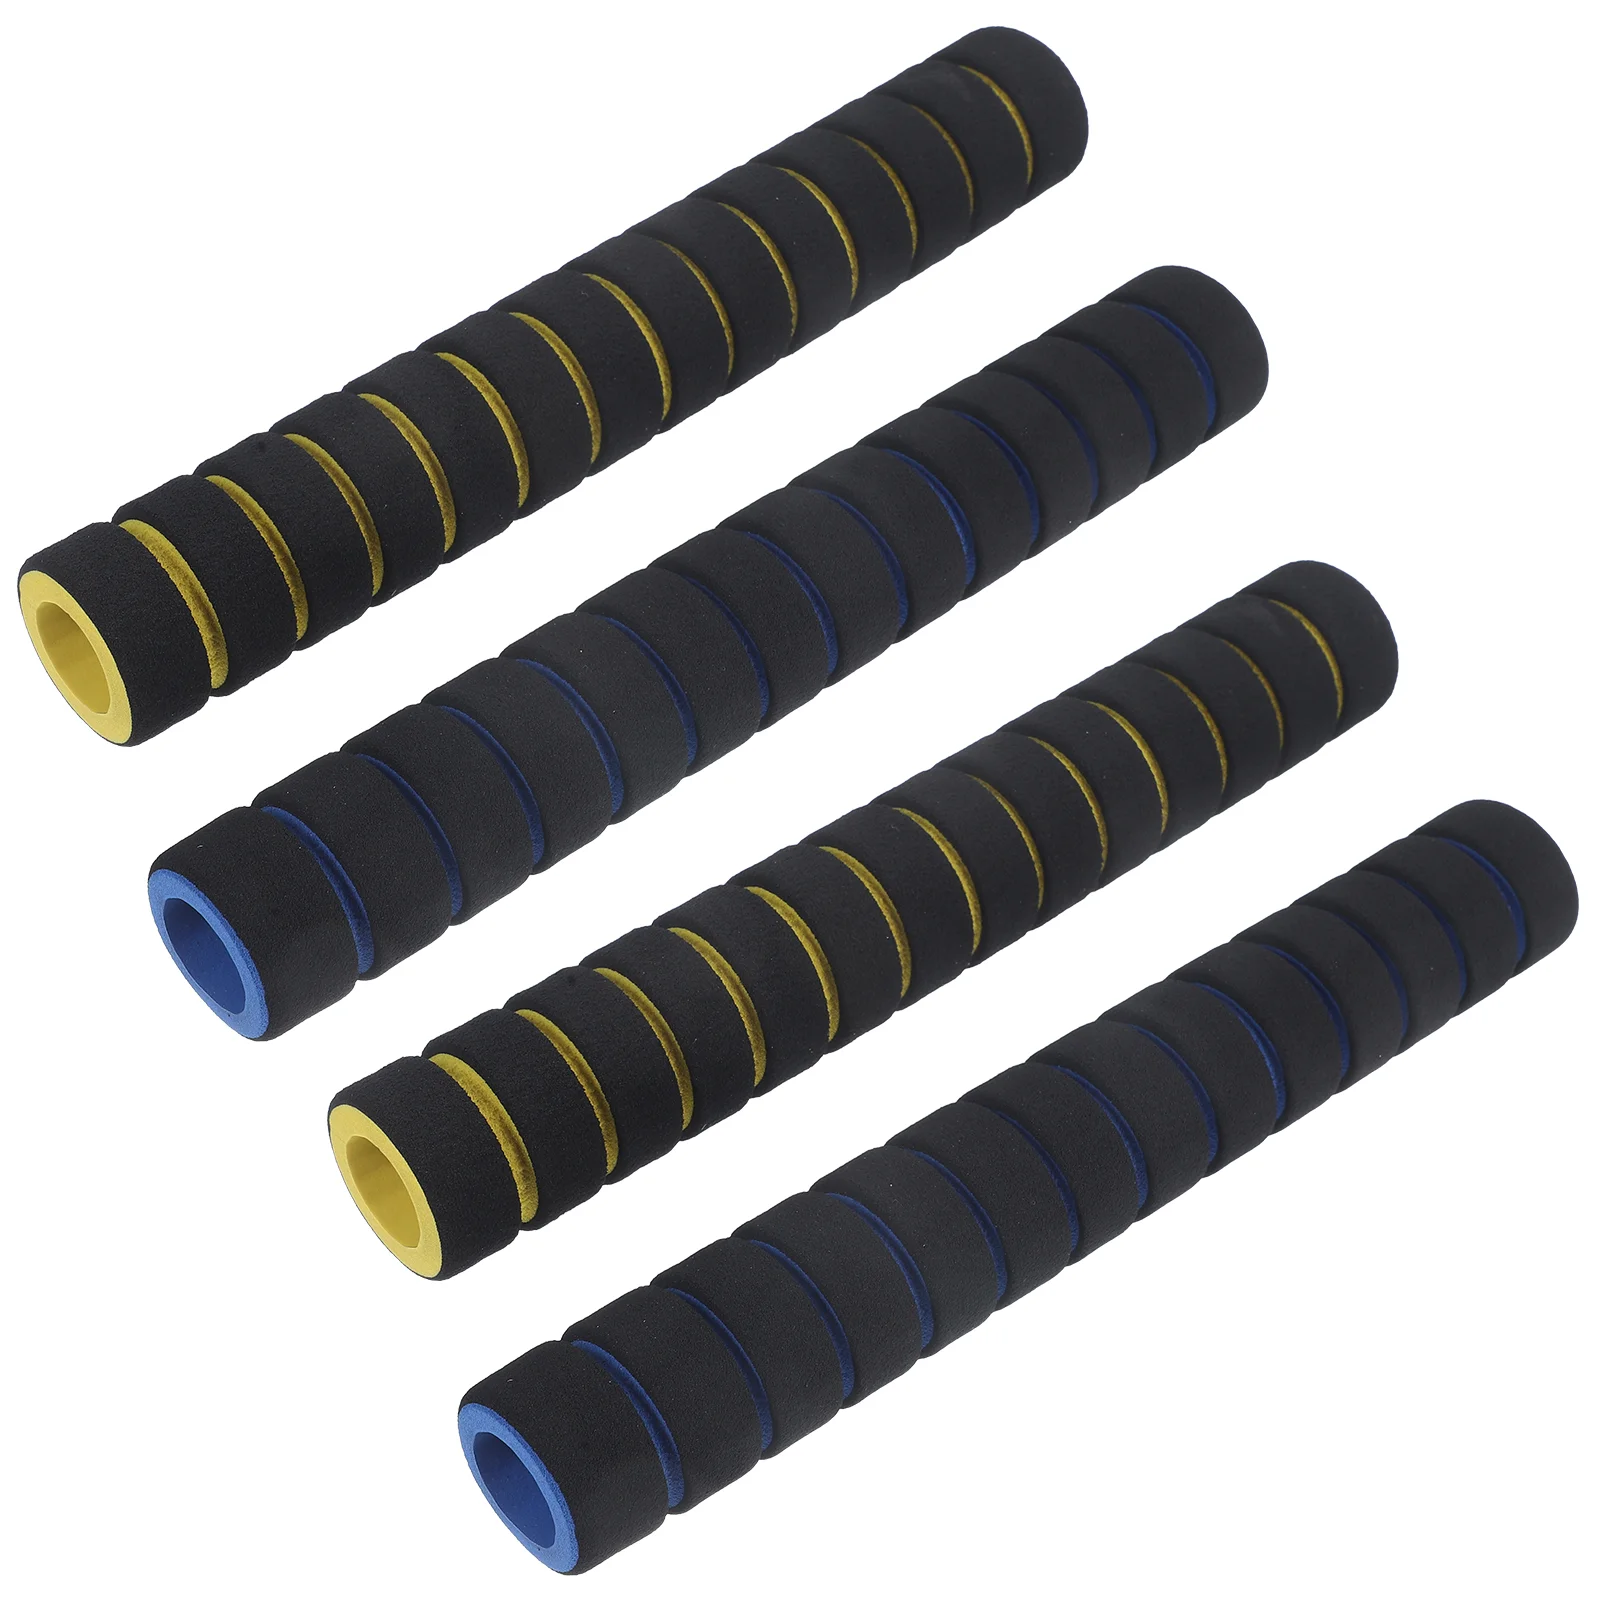 

2 Pairs of Professional Kayak Paddle Grips Non-slip Tight Cover Wraps Hand Paddle Grip